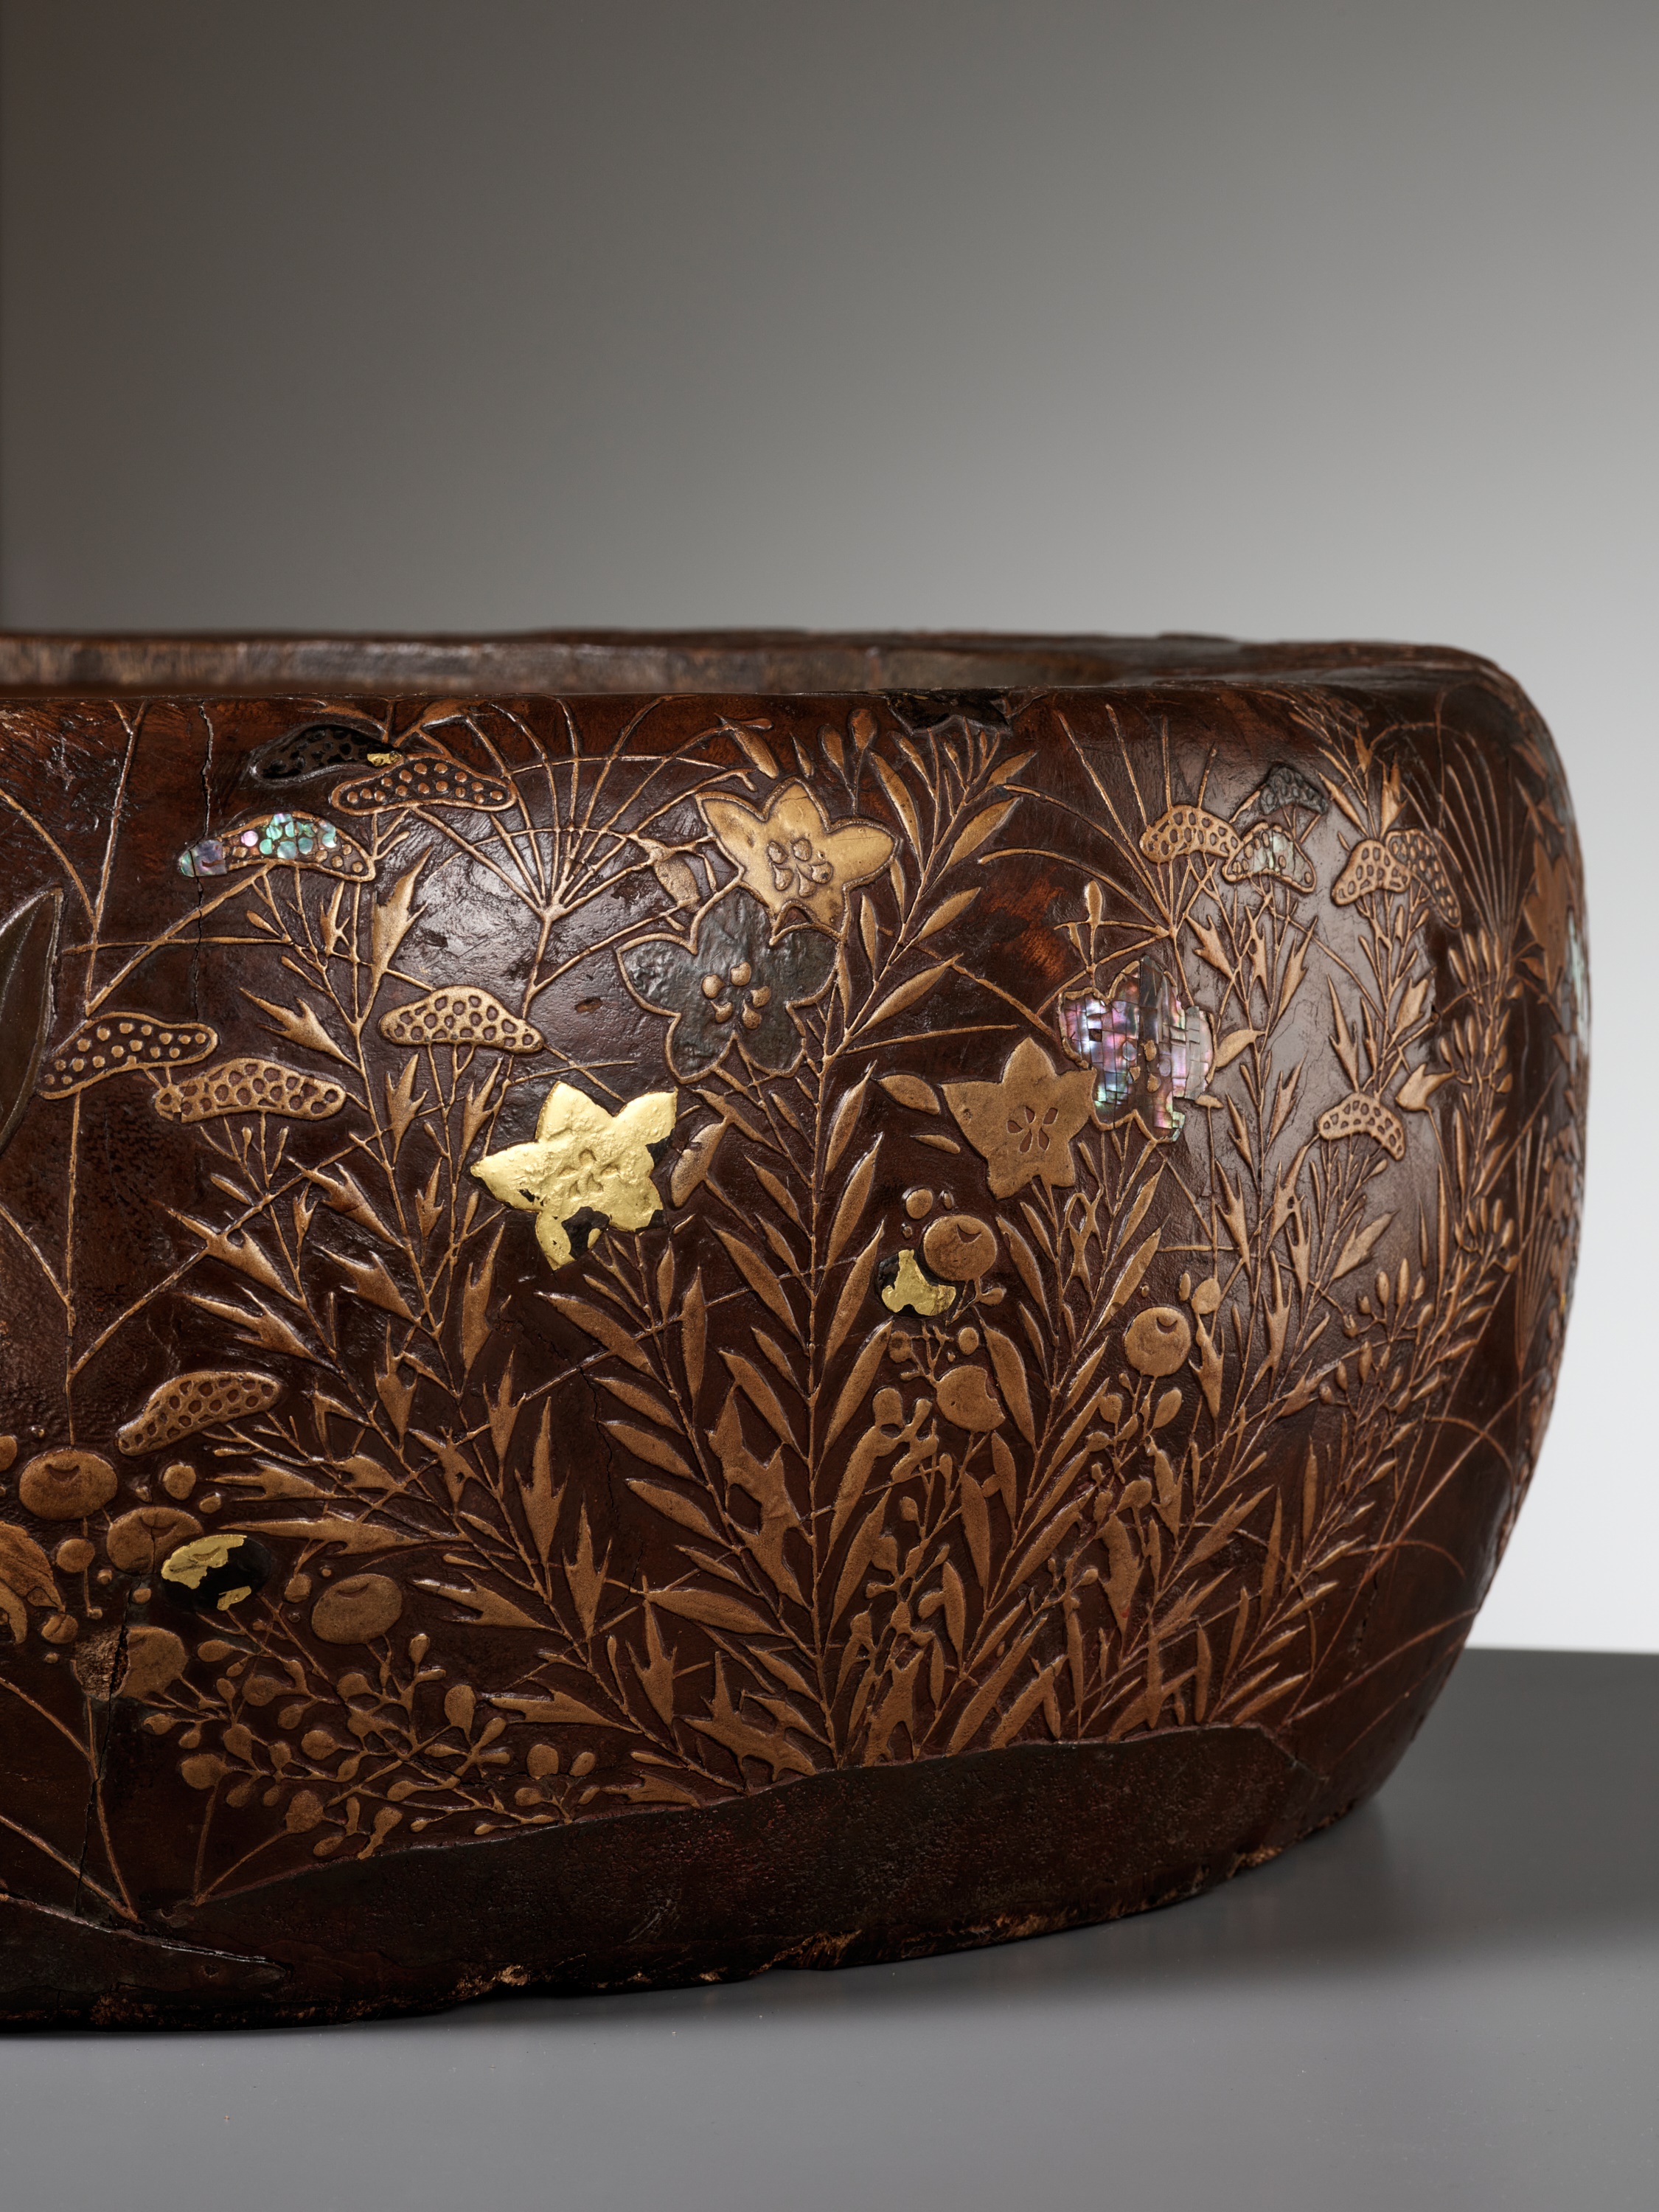 A LARGE RIMPA STYLE LACQUERED AND INLAID PAULOWNIA WOOD HIBACHI (BRAZIER) WITH LUNAR HARES - Image 3 of 14